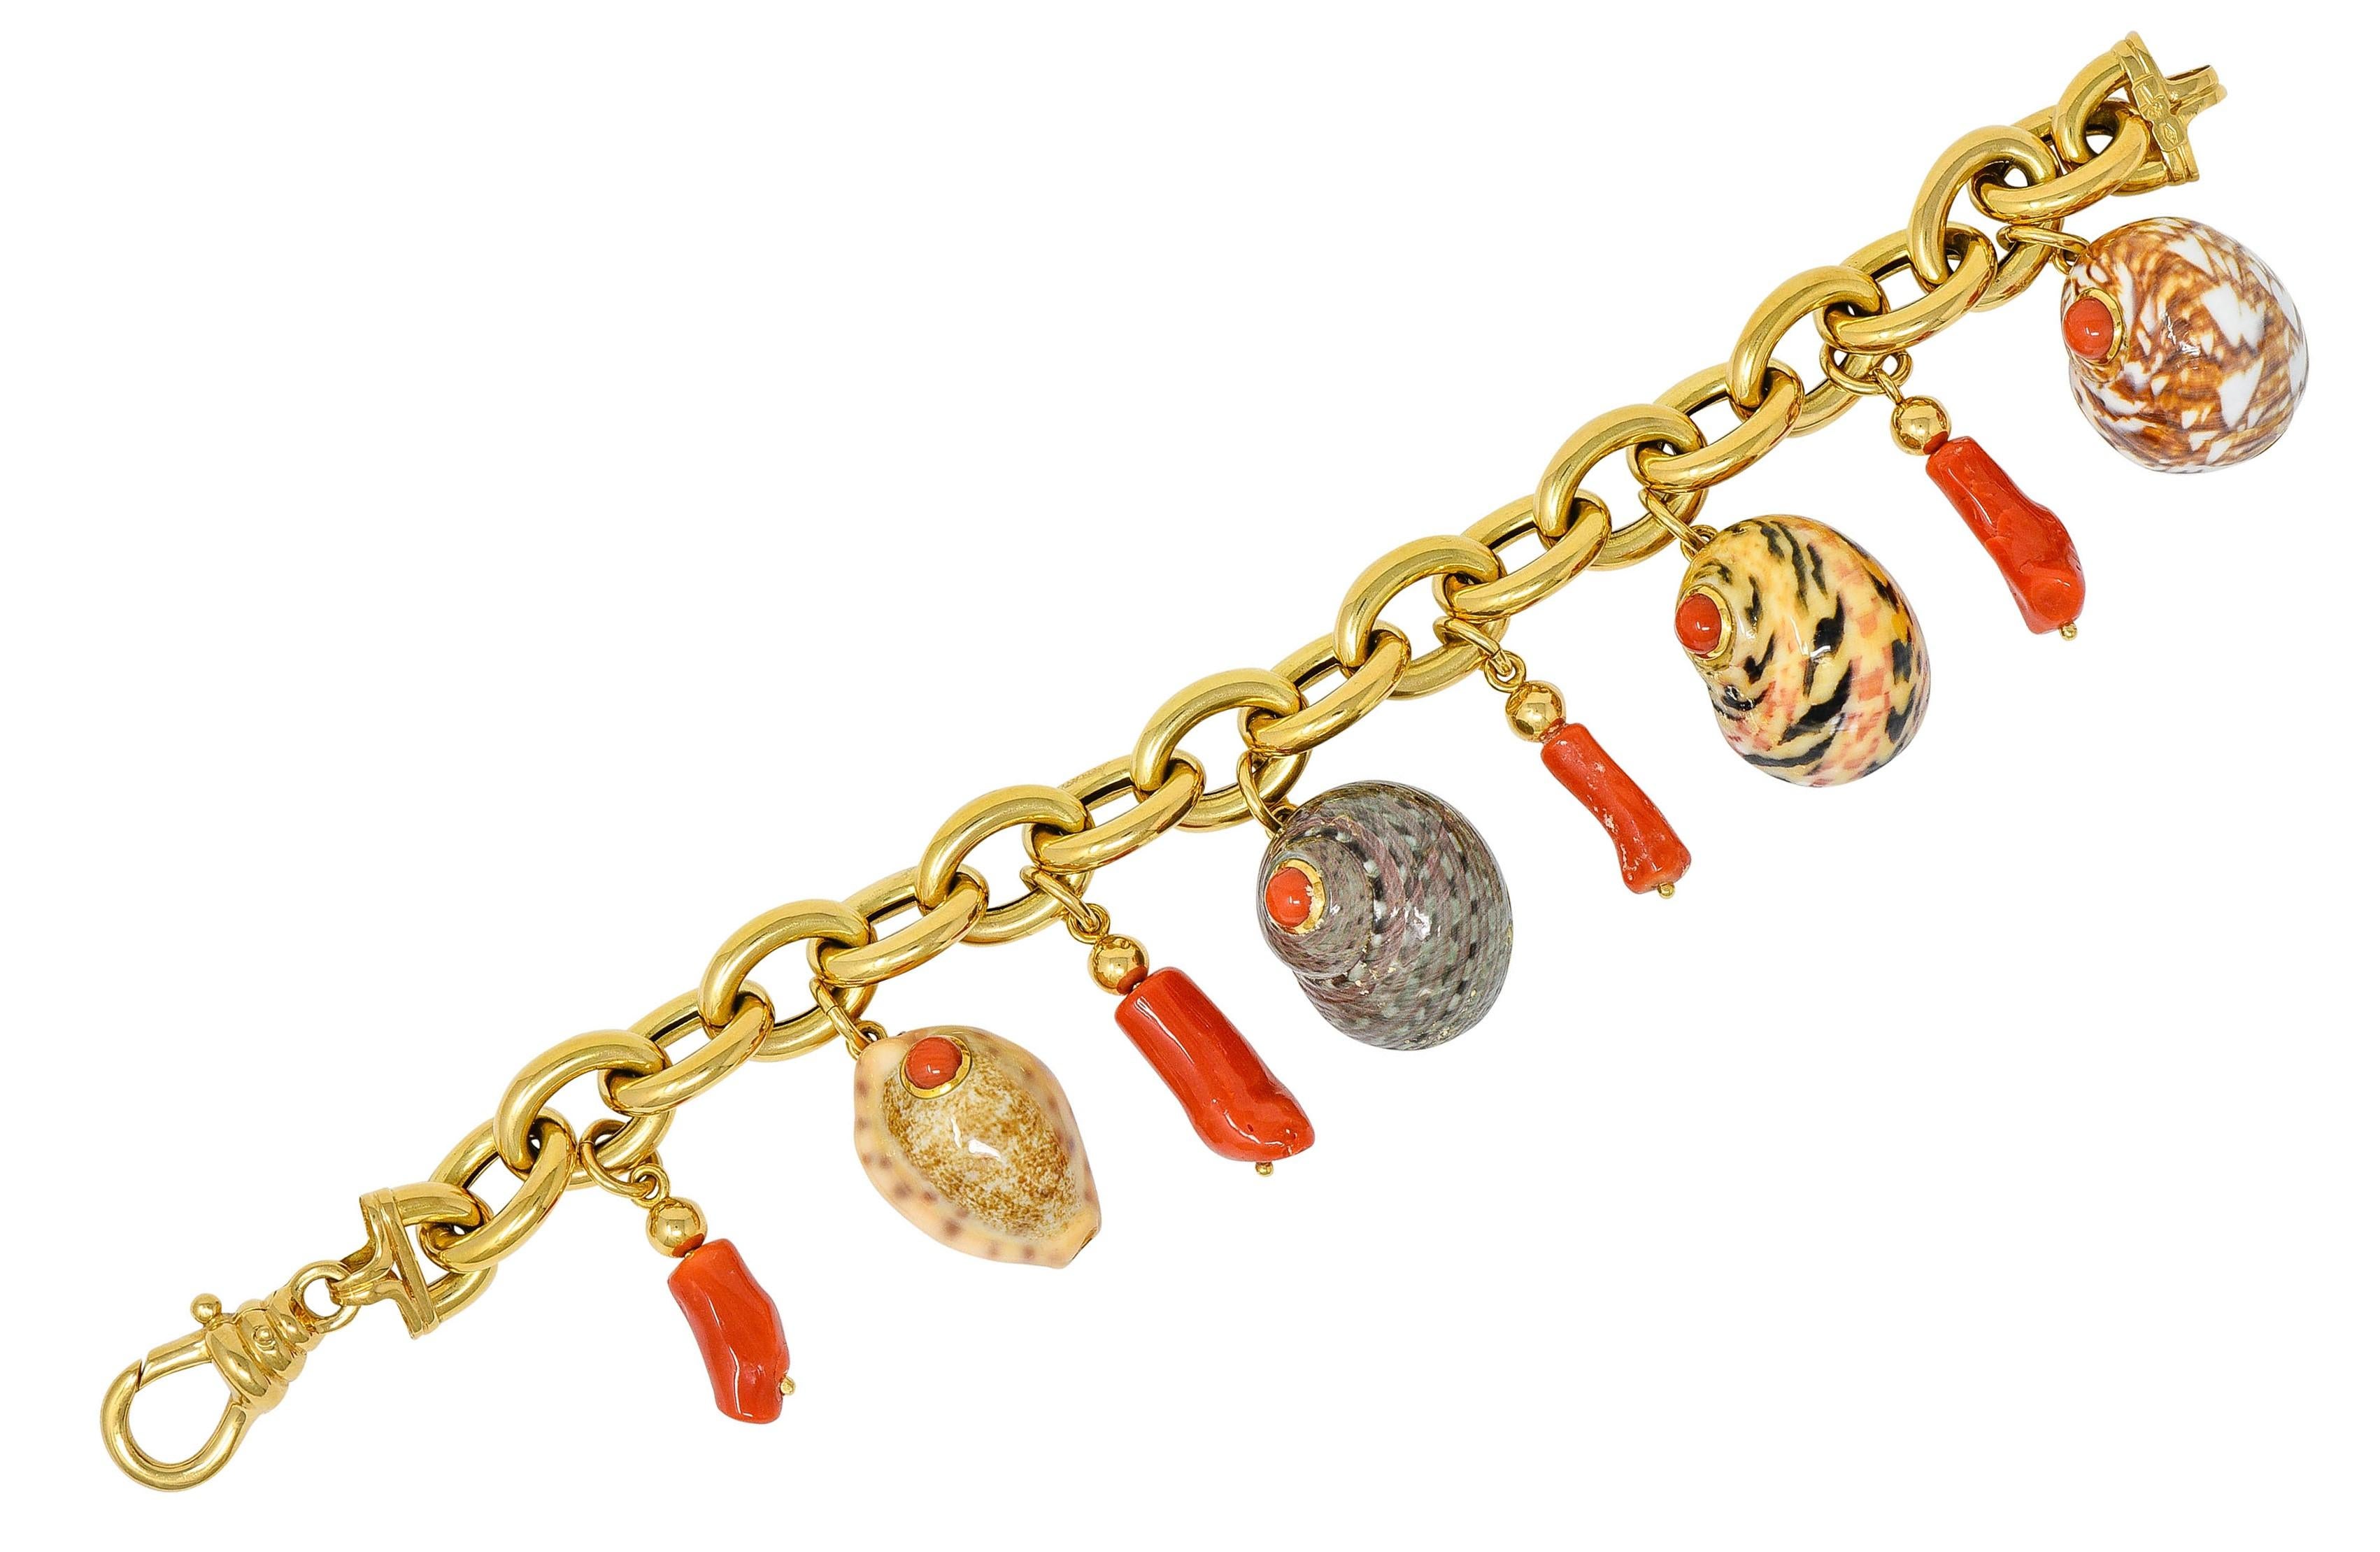 Chunky charm bracelet comprised of puffed oval links, high polished

Suspending four dynamically formed seashells, glossed with delightfully patterned enamel; no loss

A round 4.5 mm coral cabochon accents each shell; bezel set

Shells alternate